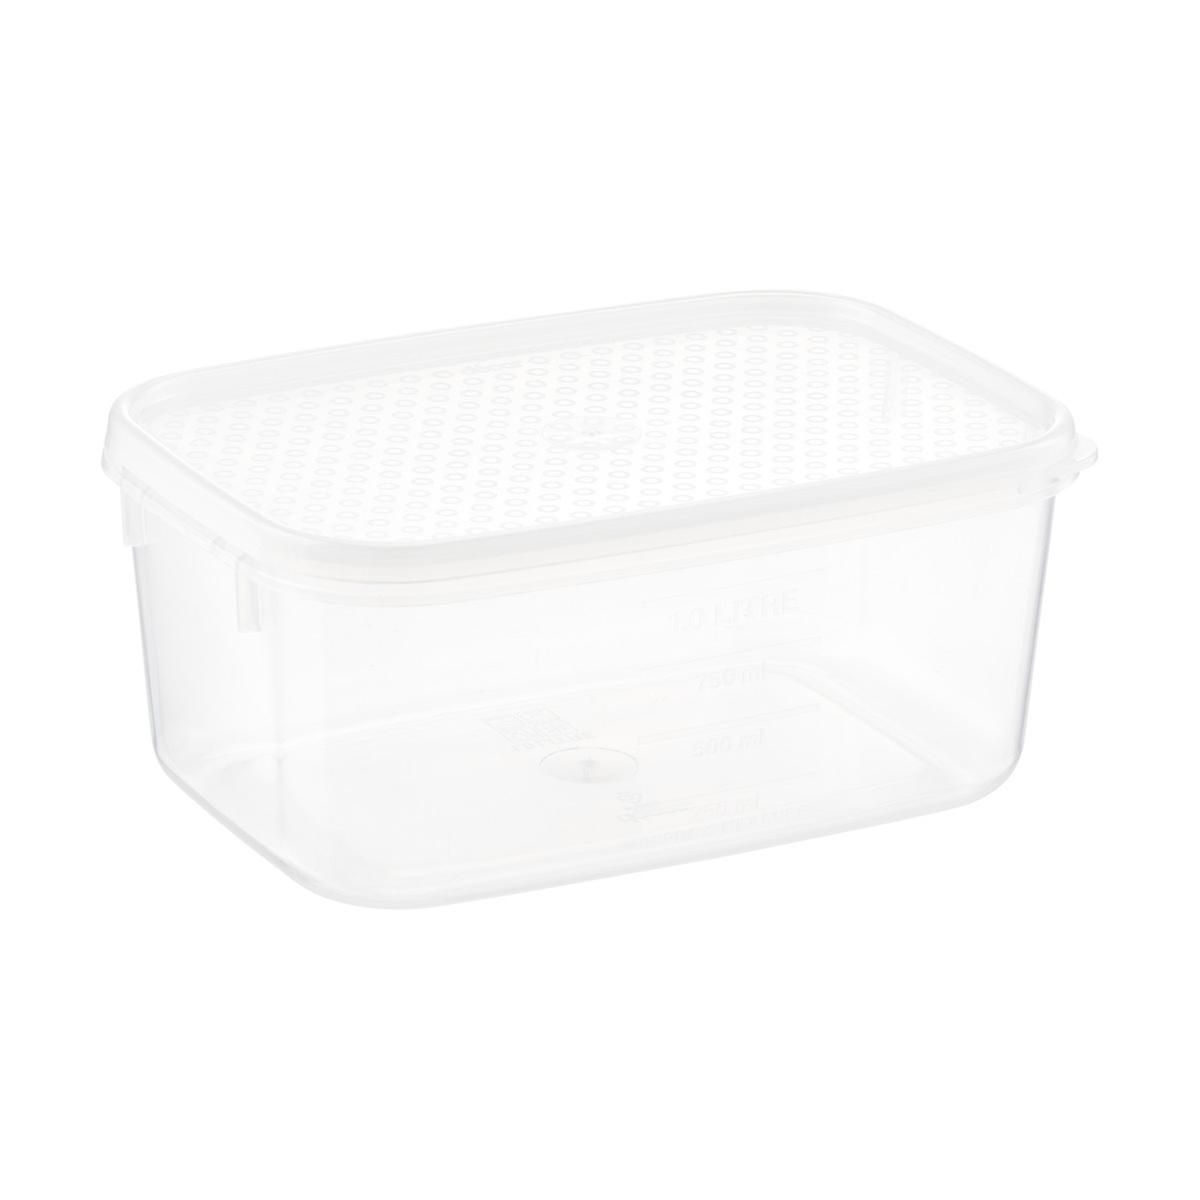 34 oz. Oblong Tellfresh Food Storage 1 ltr. Pkg/3 | The Container Store